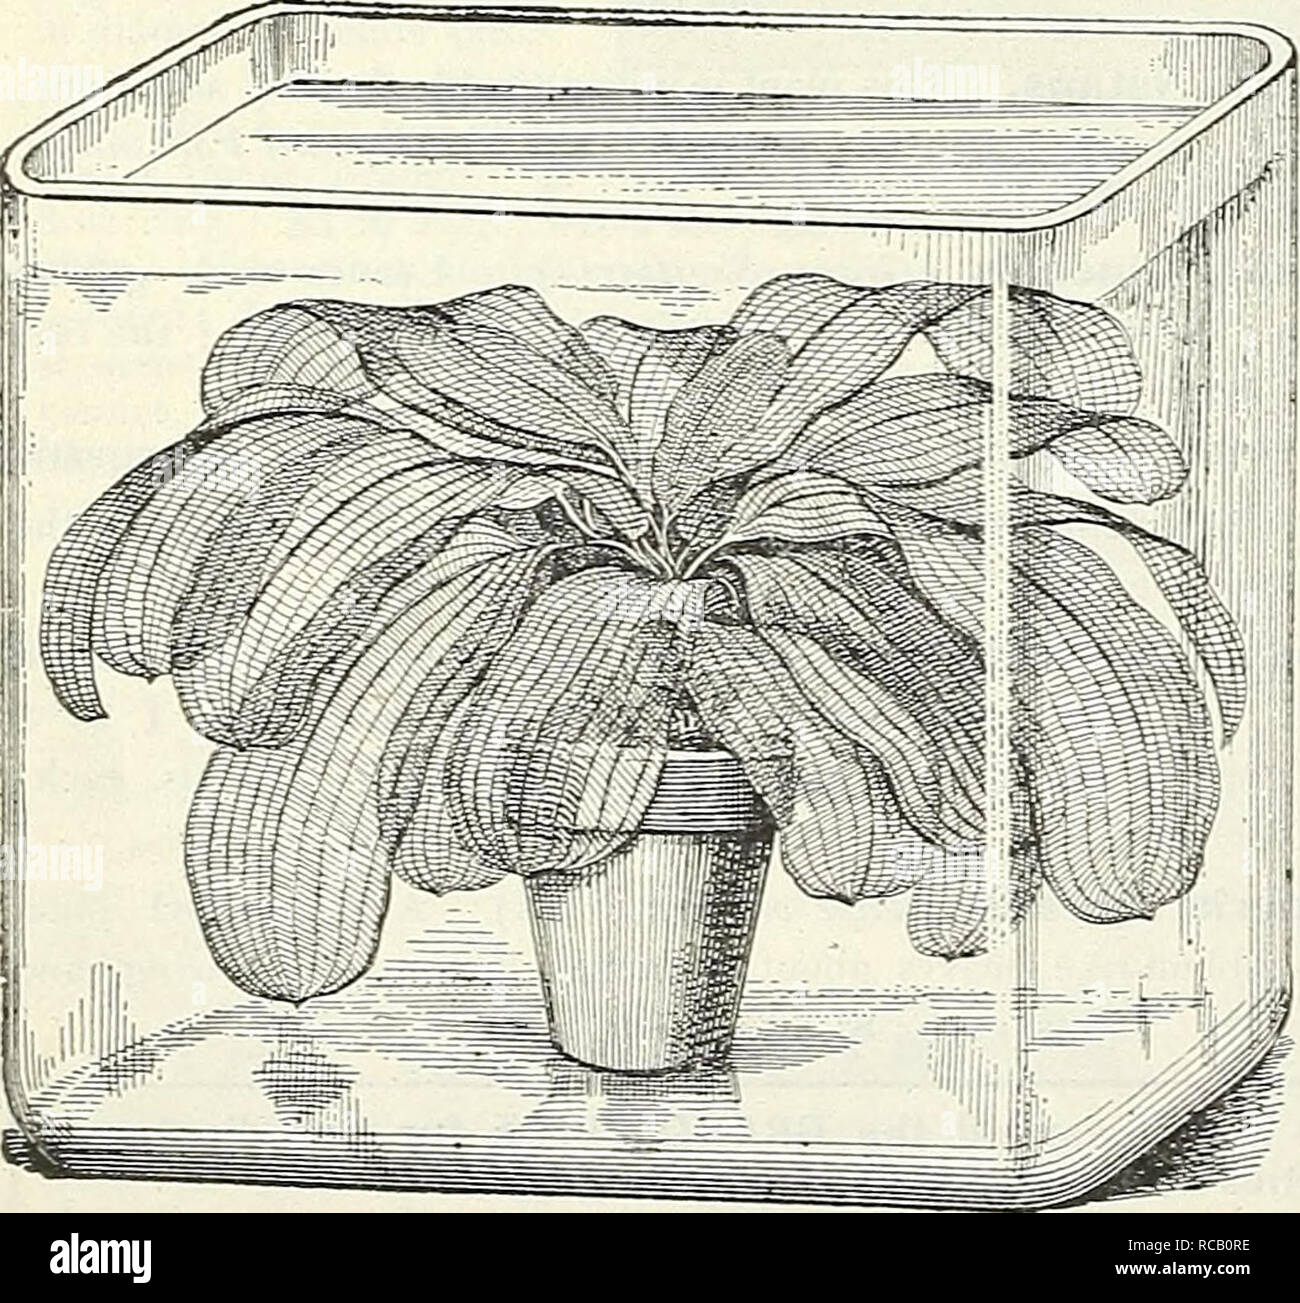 . Dreer's garden book : 1905. Seeds Catalogs; Nursery stock Catalogs; Gardening Equipment and supplies Catalogs; Flowers Seeds Catalogs; Vegetables Seeds Catalogs; Fruit Seeds Catalogs. 124 nniH^RTADREK-PnilADPHIAJ^-^WiTERLILIES-»AQUMICS- Miscellaneous Aquatics. &amp;c' also under Aqiiariiivt Plants on preceding page. Acorus Japonica Variegata ( Variegated Sweet Flag). One of the finest variegated plains in cultivation. 25 cts. each; §2 50 per doz. — QramineUS Variegatus Dwarf growing, with leathery leaves, beautifully margined with w-hile; a handsome plant for margins or pot culture. 20 cts.  Stock Photo